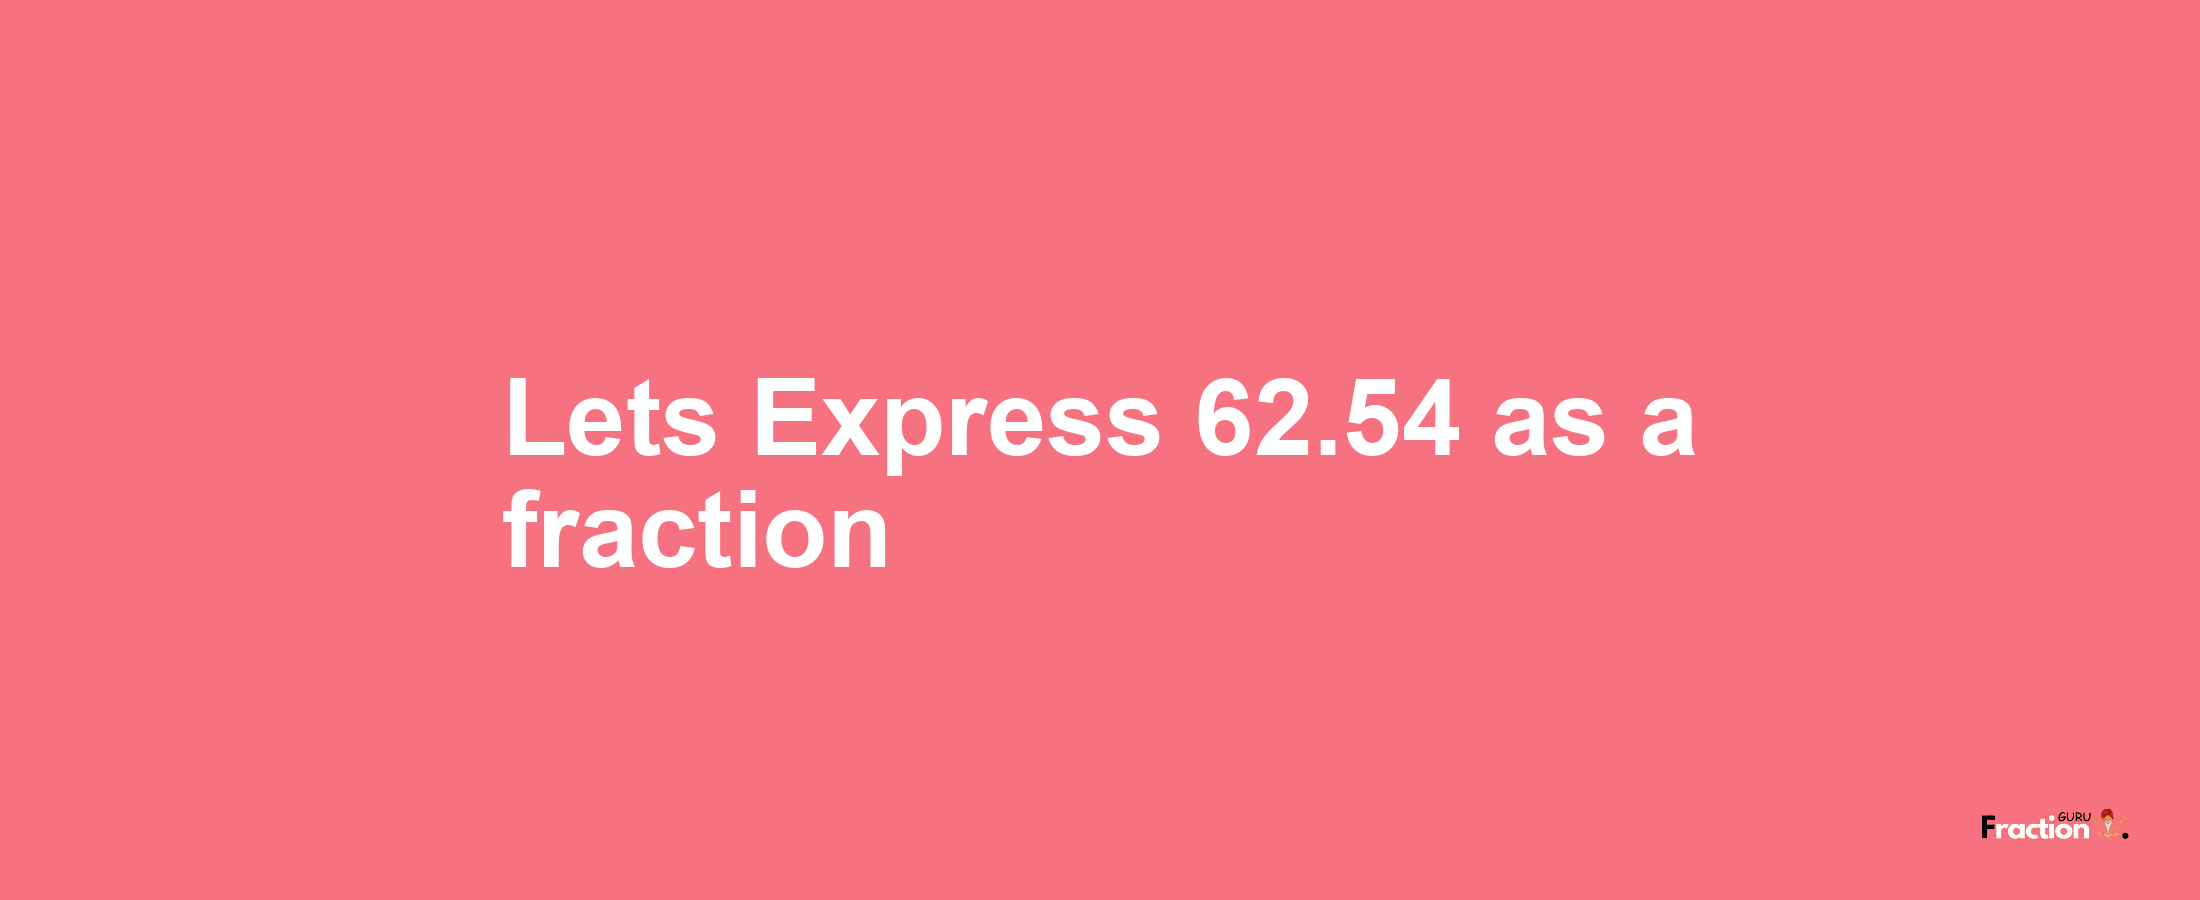 Lets Express 62.54 as afraction